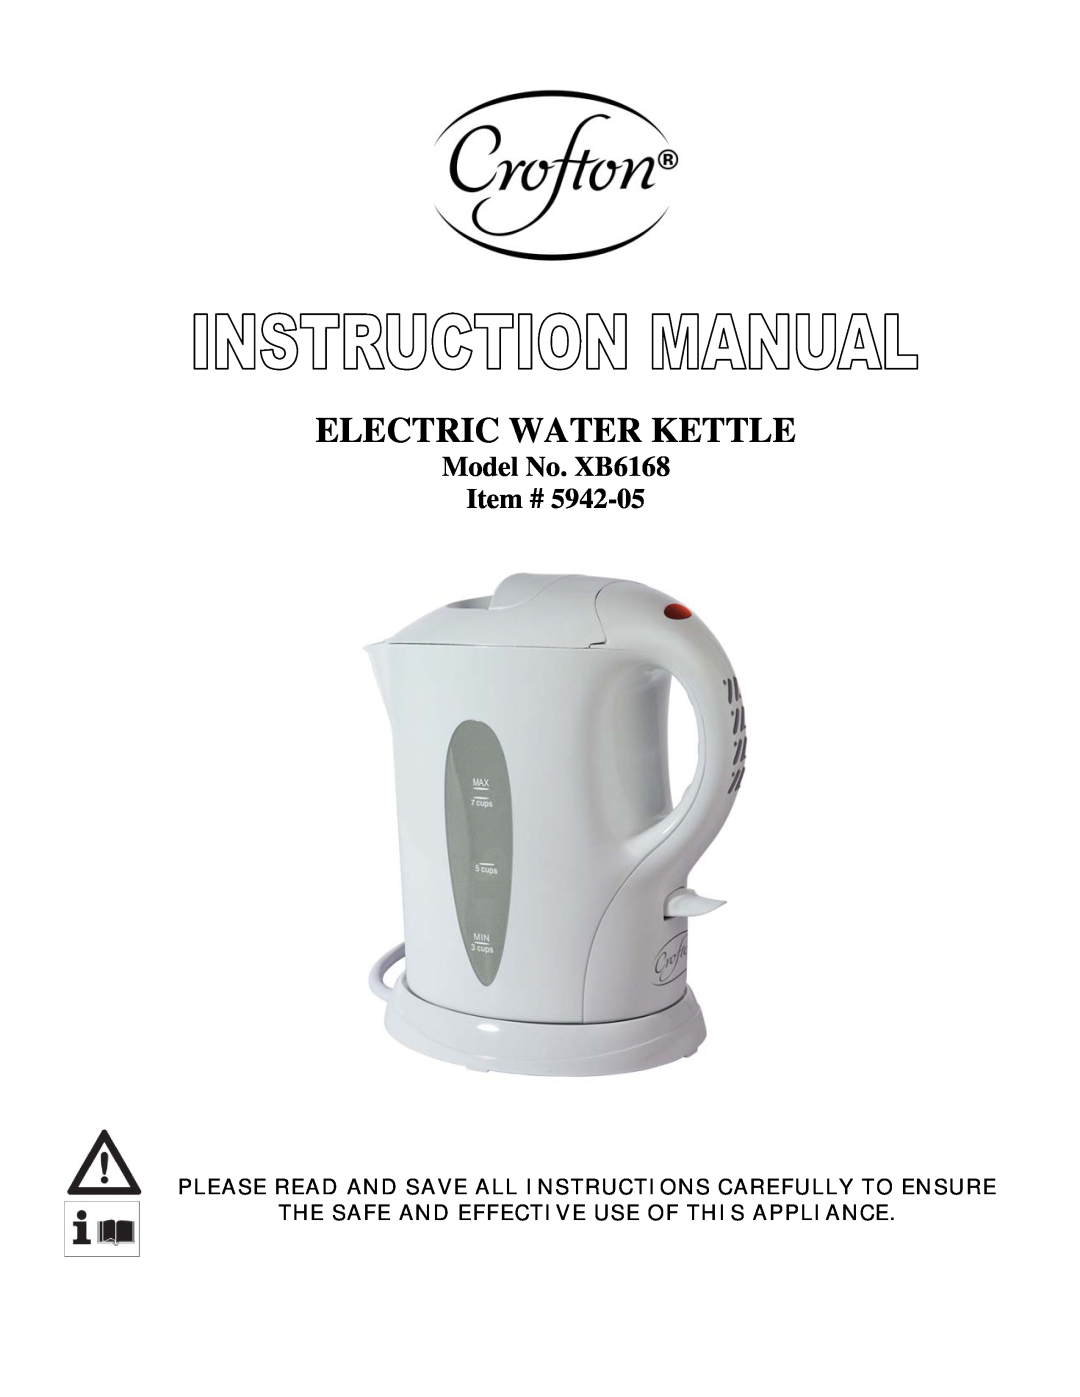 Wachsmuth & Krogmann XB6168 manual The Safe And Effective Use Of This Appliance, Electric Water Kettle 